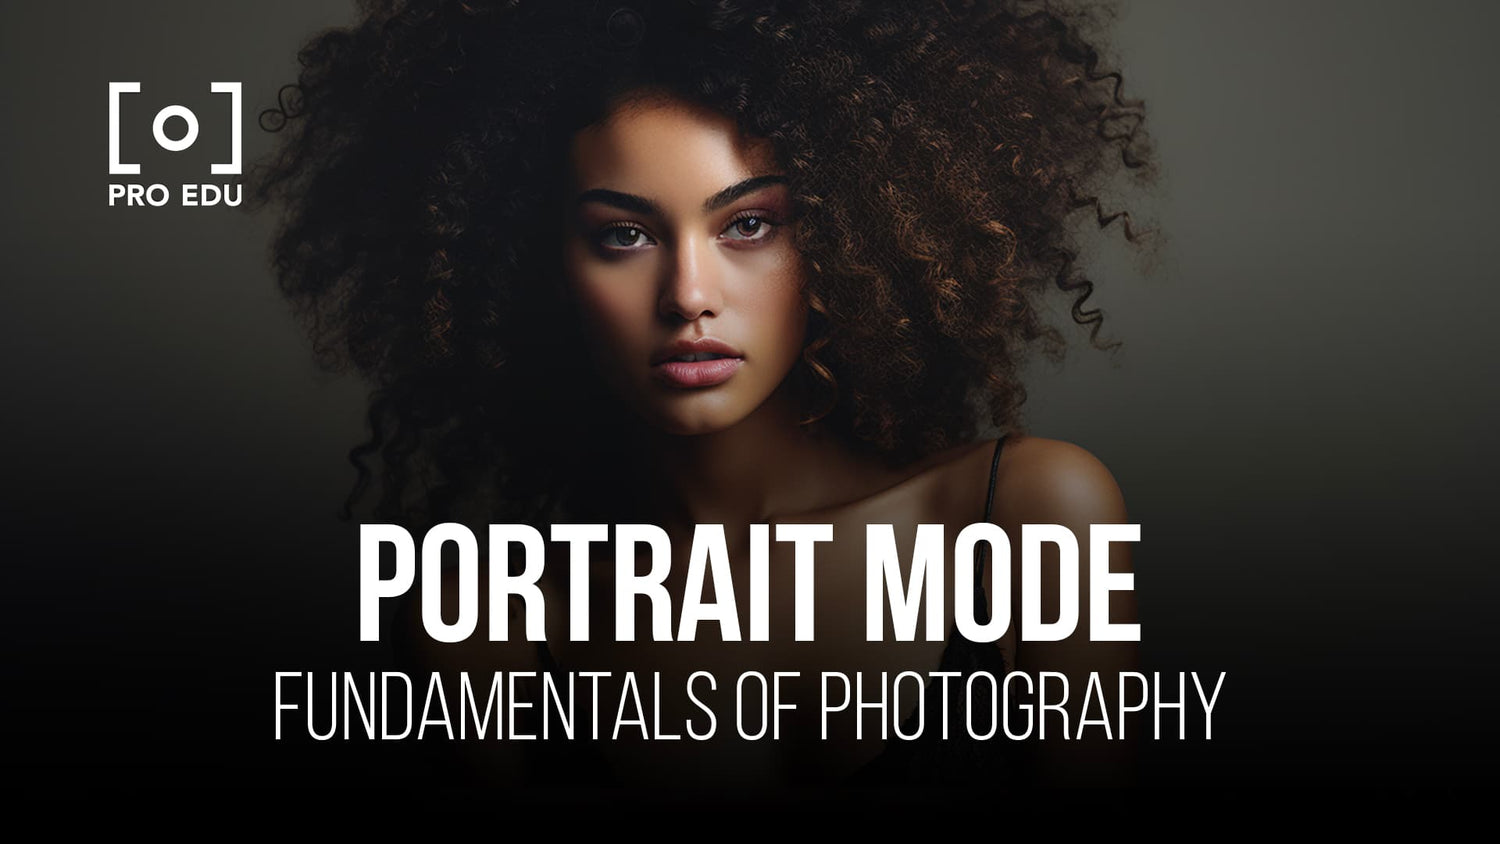 Capturing stunning portraits with portrait mode photography techniques